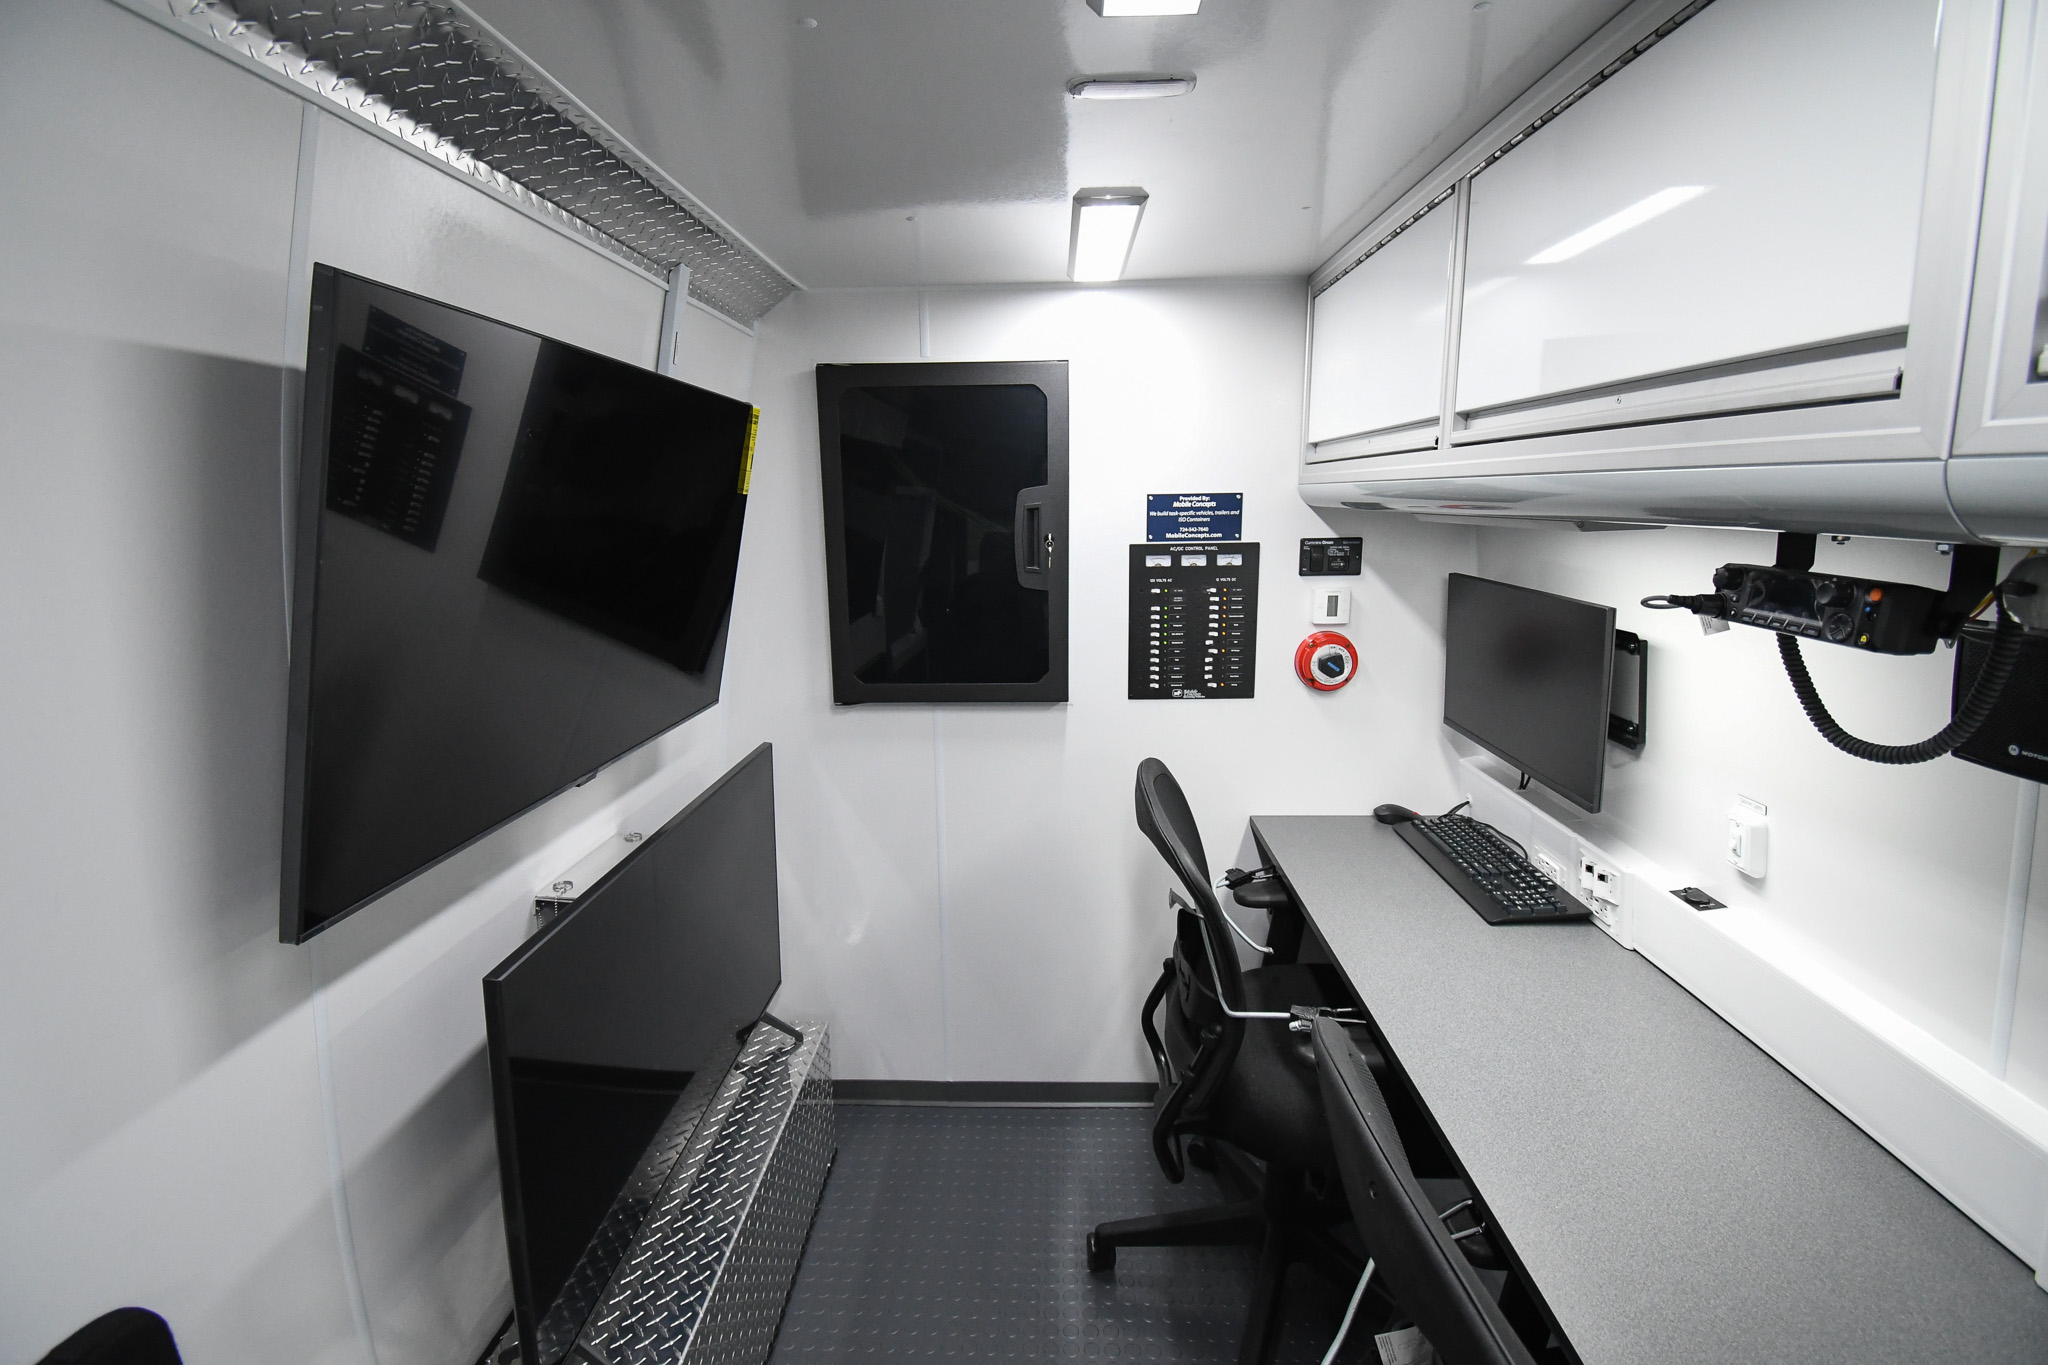 An interior view of 2 workstations, 2 TVs, and the wall-mounted electronics cabinet inside the unit made for the San Joaquin County Sheriff's Office.